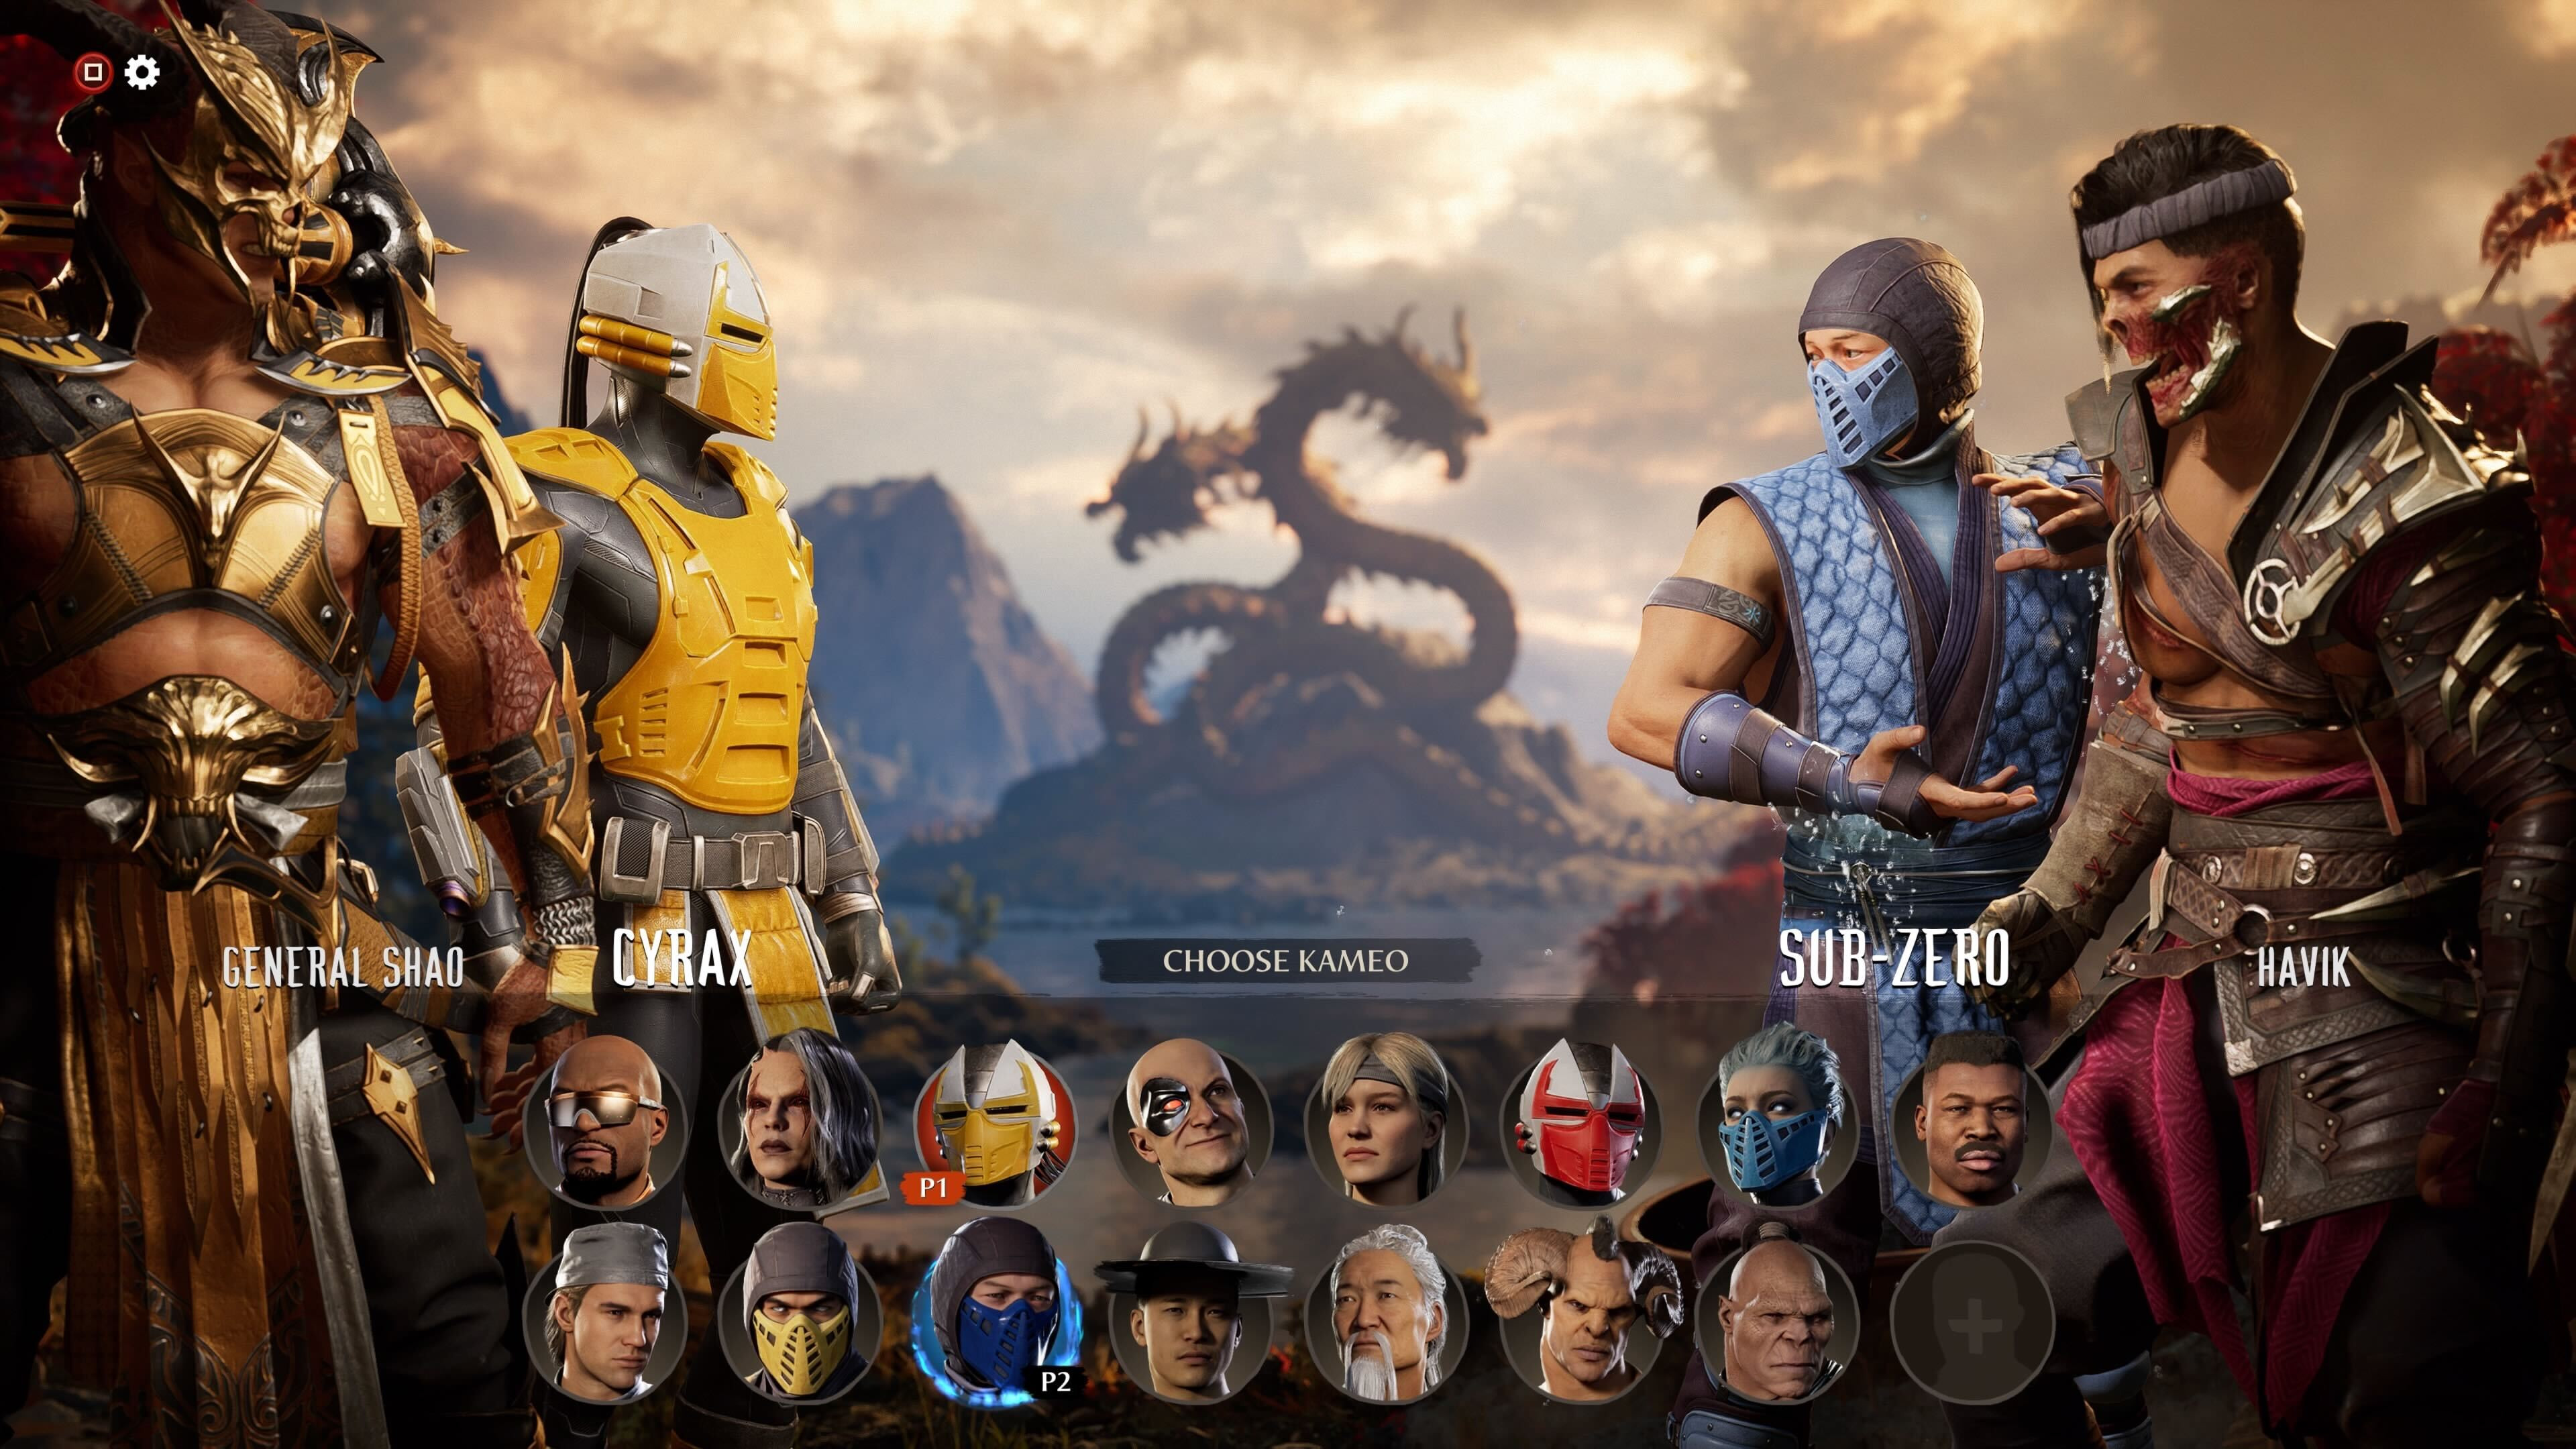 Mortal Kombat 1 now includes the option to unlock Havik, Shang Tsung and  the 5 Kameos but it'll cost you half as much as the game